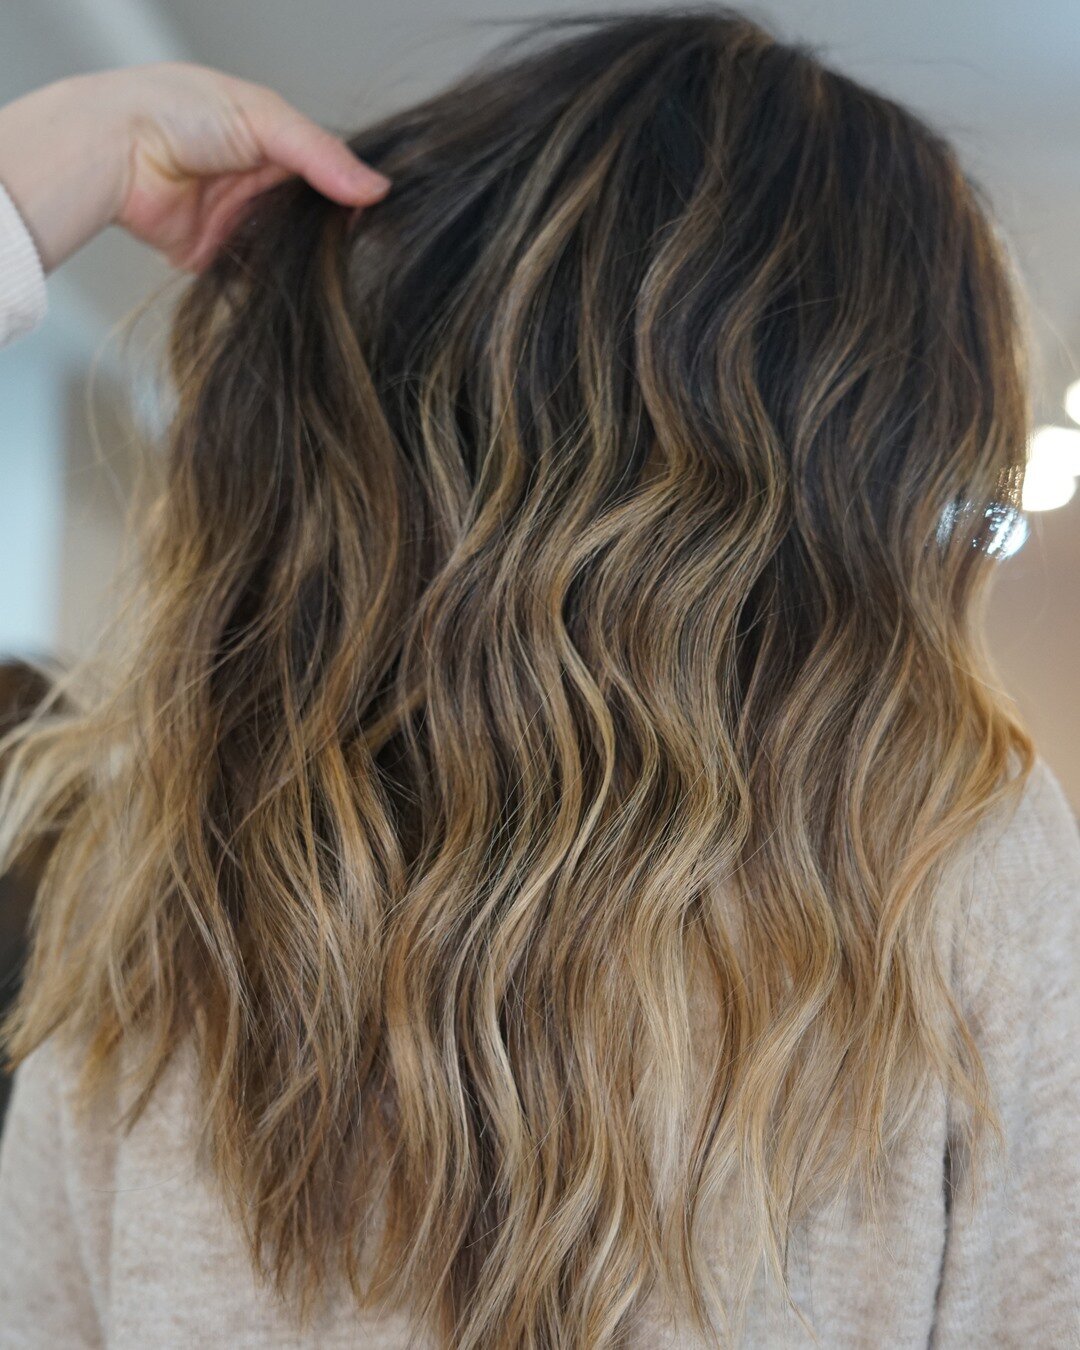 Less is more with a partial highlight to maintain contrast and add pops of brightness ✨ #protip⠀⠀⠀⠀⠀⠀⠀⠀⠀
.⠀⠀⠀⠀⠀⠀⠀⠀⠀
.⠀⠀⠀⠀⠀⠀⠀⠀⠀
.⠀⠀⠀⠀⠀⠀⠀⠀⠀
.⠀⠀⠀⠀⠀⠀⠀⠀⠀
.⠀⠀⠀⠀⠀⠀⠀⠀⠀
#arisahairny #chelseanyc #nyhair #nychair #partialhighlights #highlightshair #livedinhair 